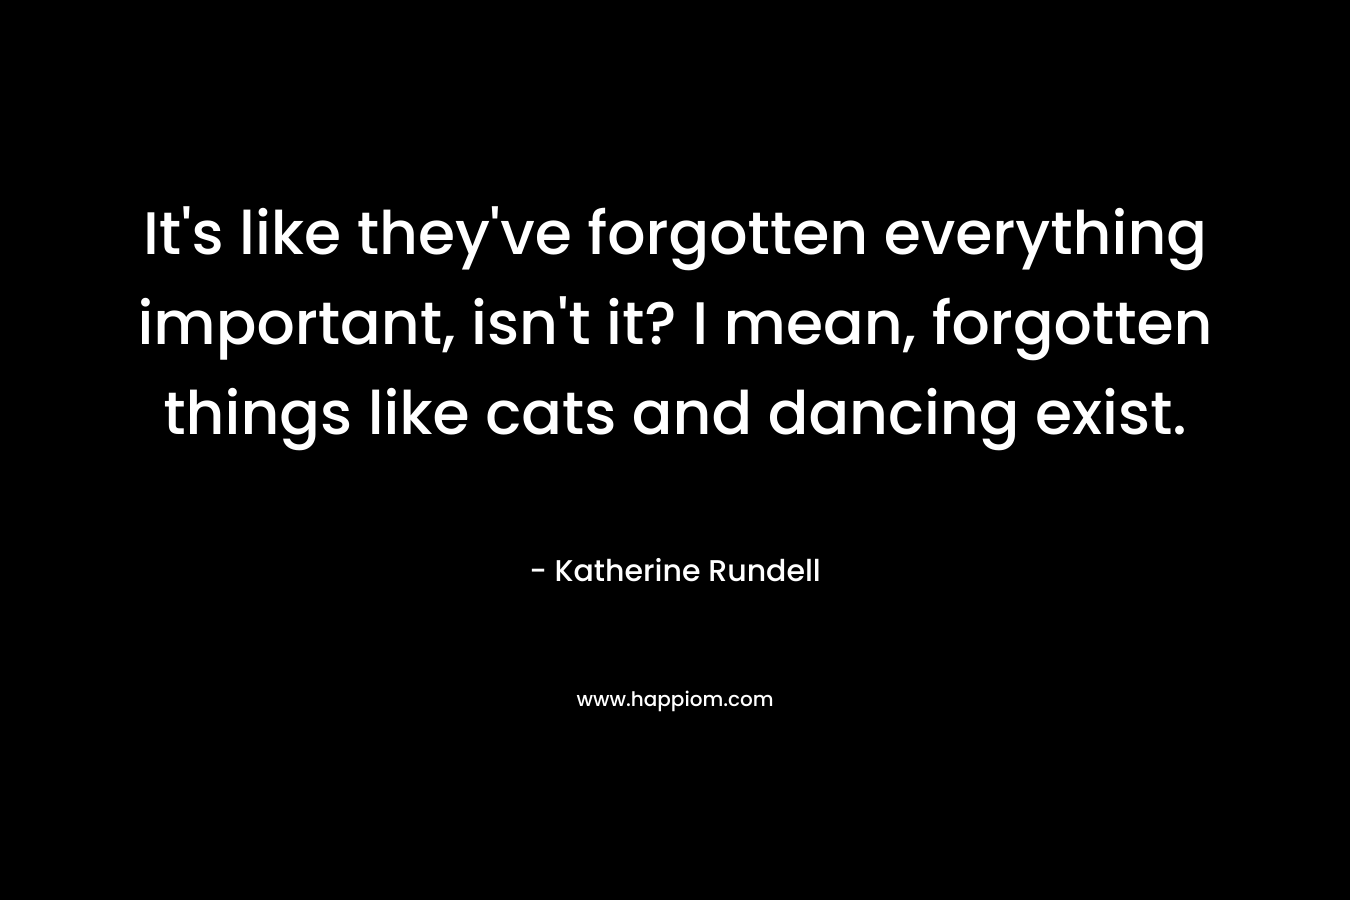 It’s like they’ve forgotten everything important, isn’t it? I mean, forgotten things like cats and dancing exist. – Katherine Rundell